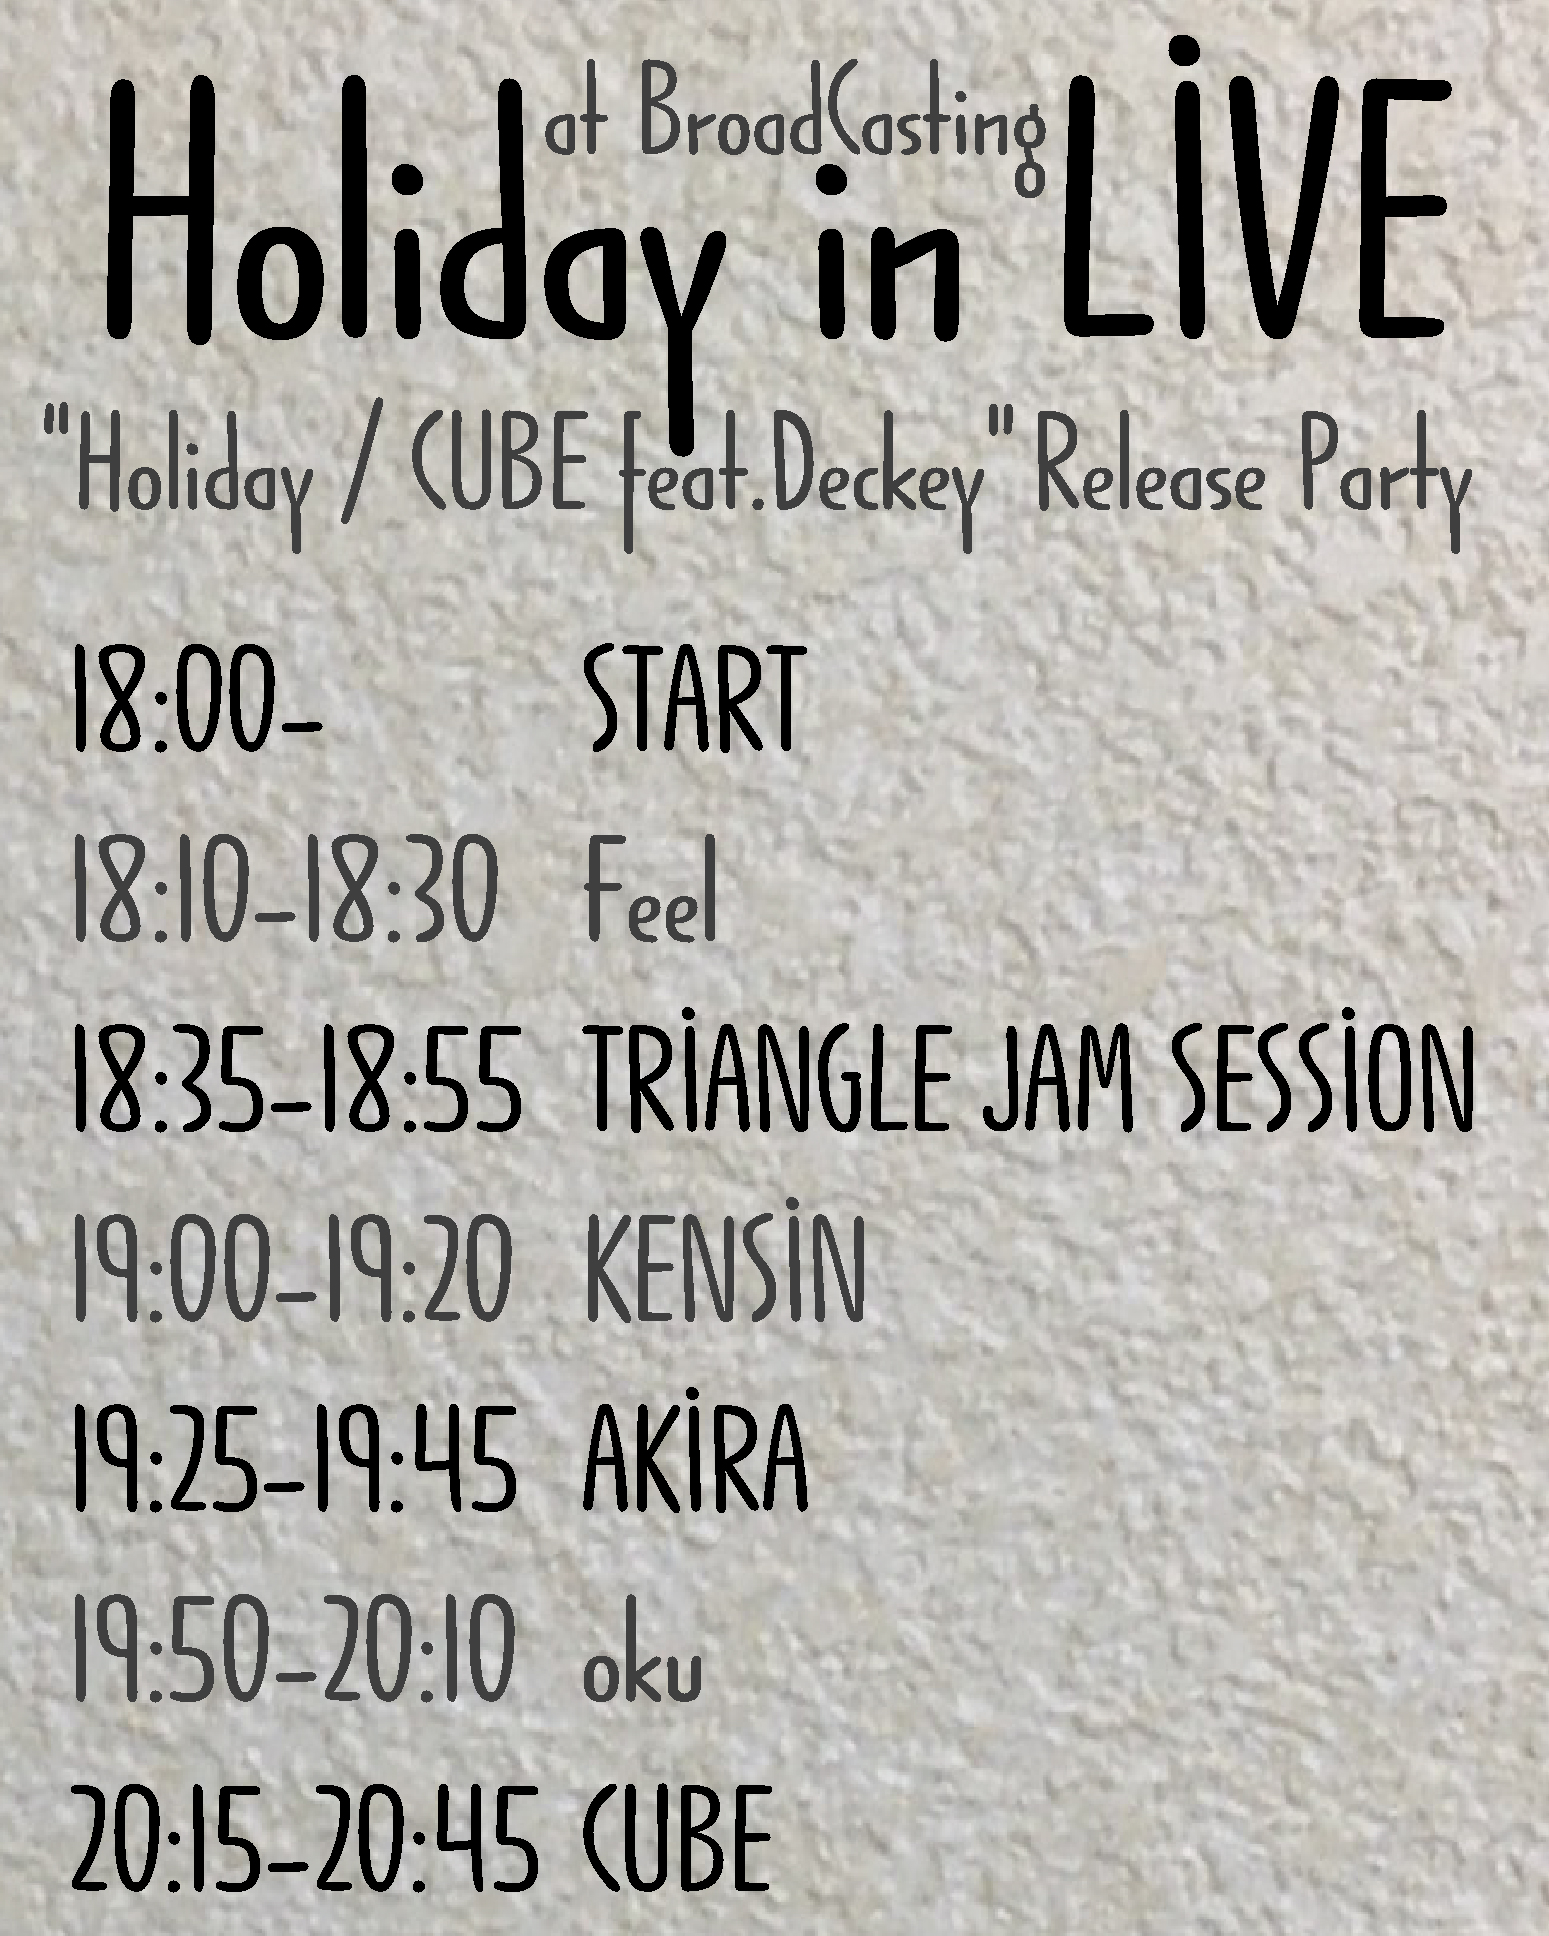 Holiday in LIVE